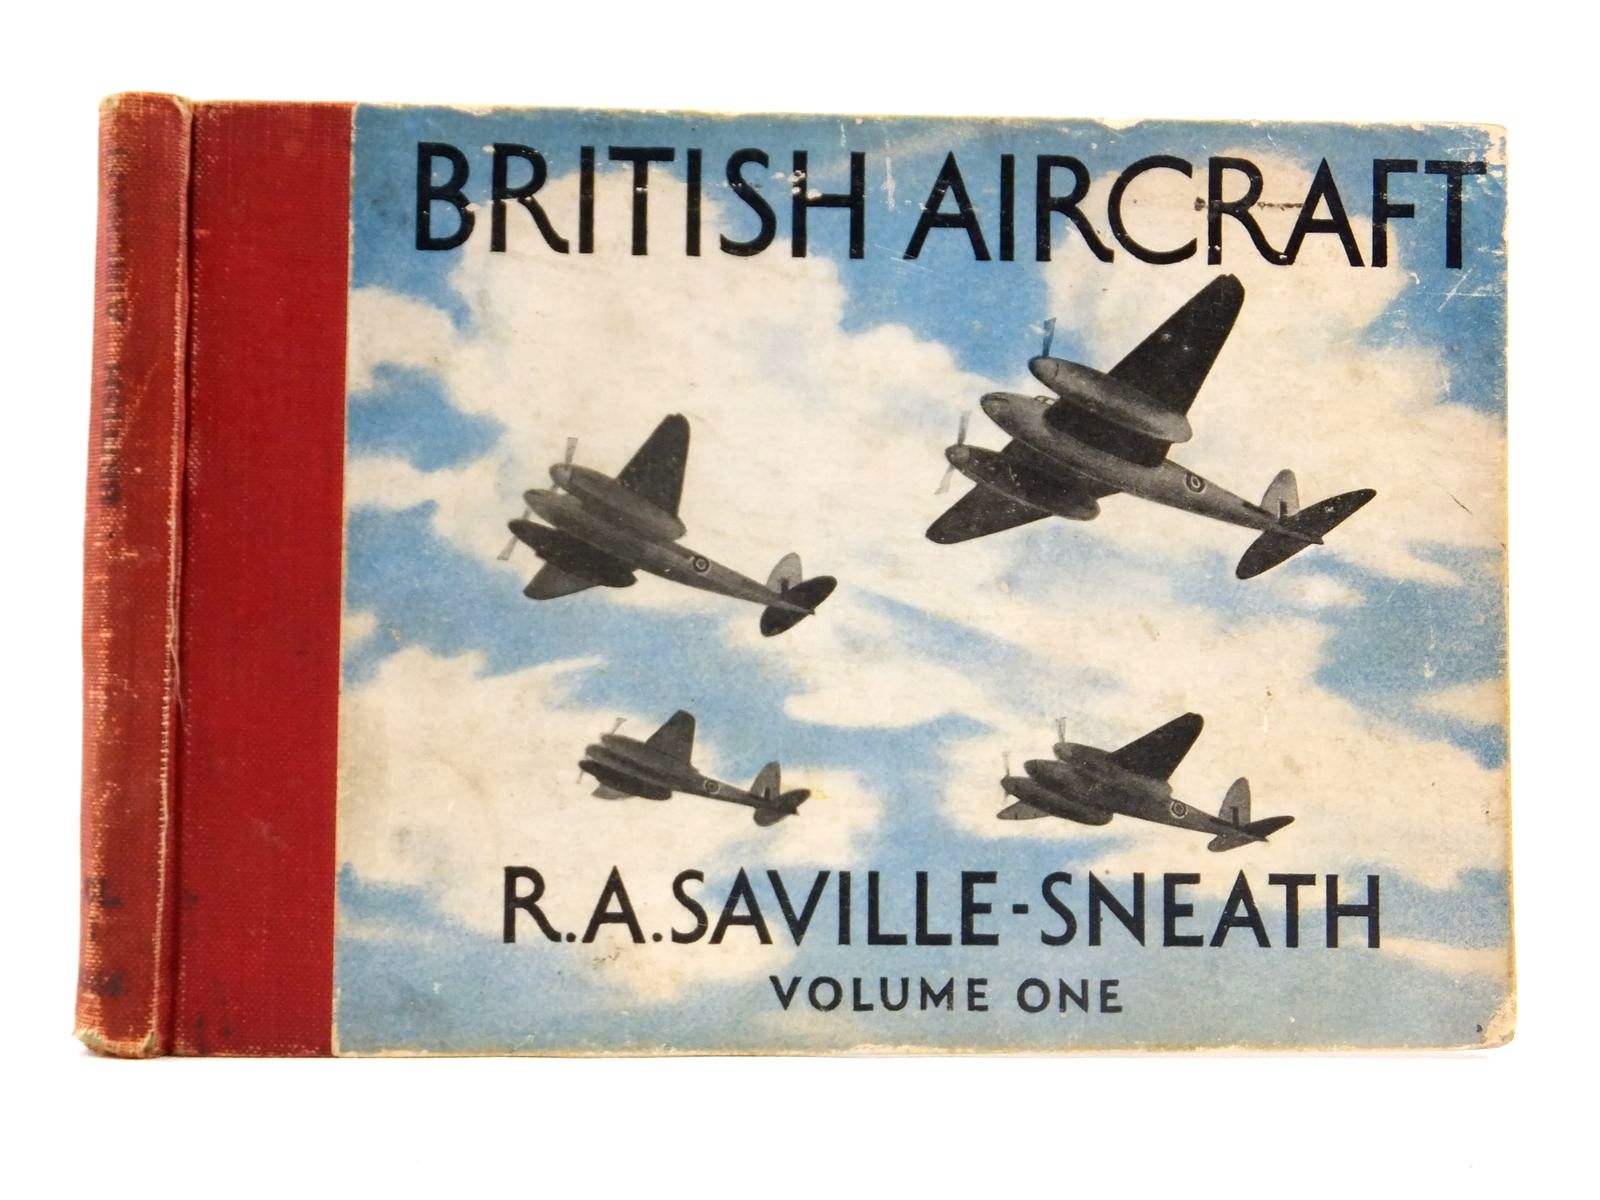 Photo of BRITISH AIRCRAFT VOLUME ONE written by Saville-Sneath, R.A. published by Penguin (STOCK CODE: 1608591)  for sale by Stella & Rose's Books